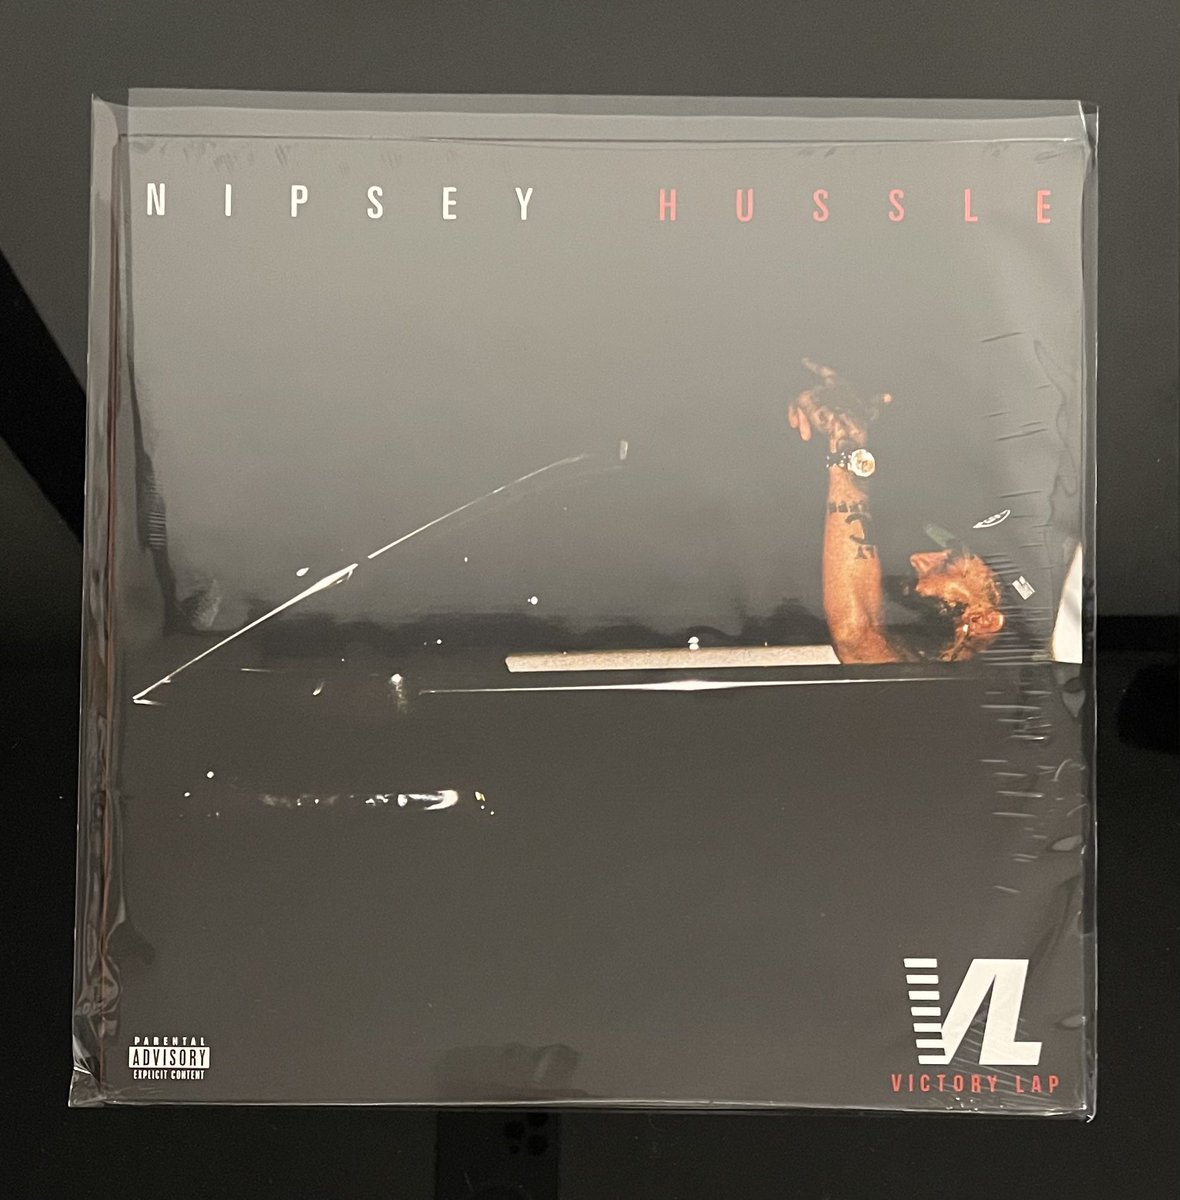 Nipsey Hussle R.I.P
Victory Lap 🏁🏁🏁
2018 OG Press 
Released 4 years ago today 
#ripnipseyhussle